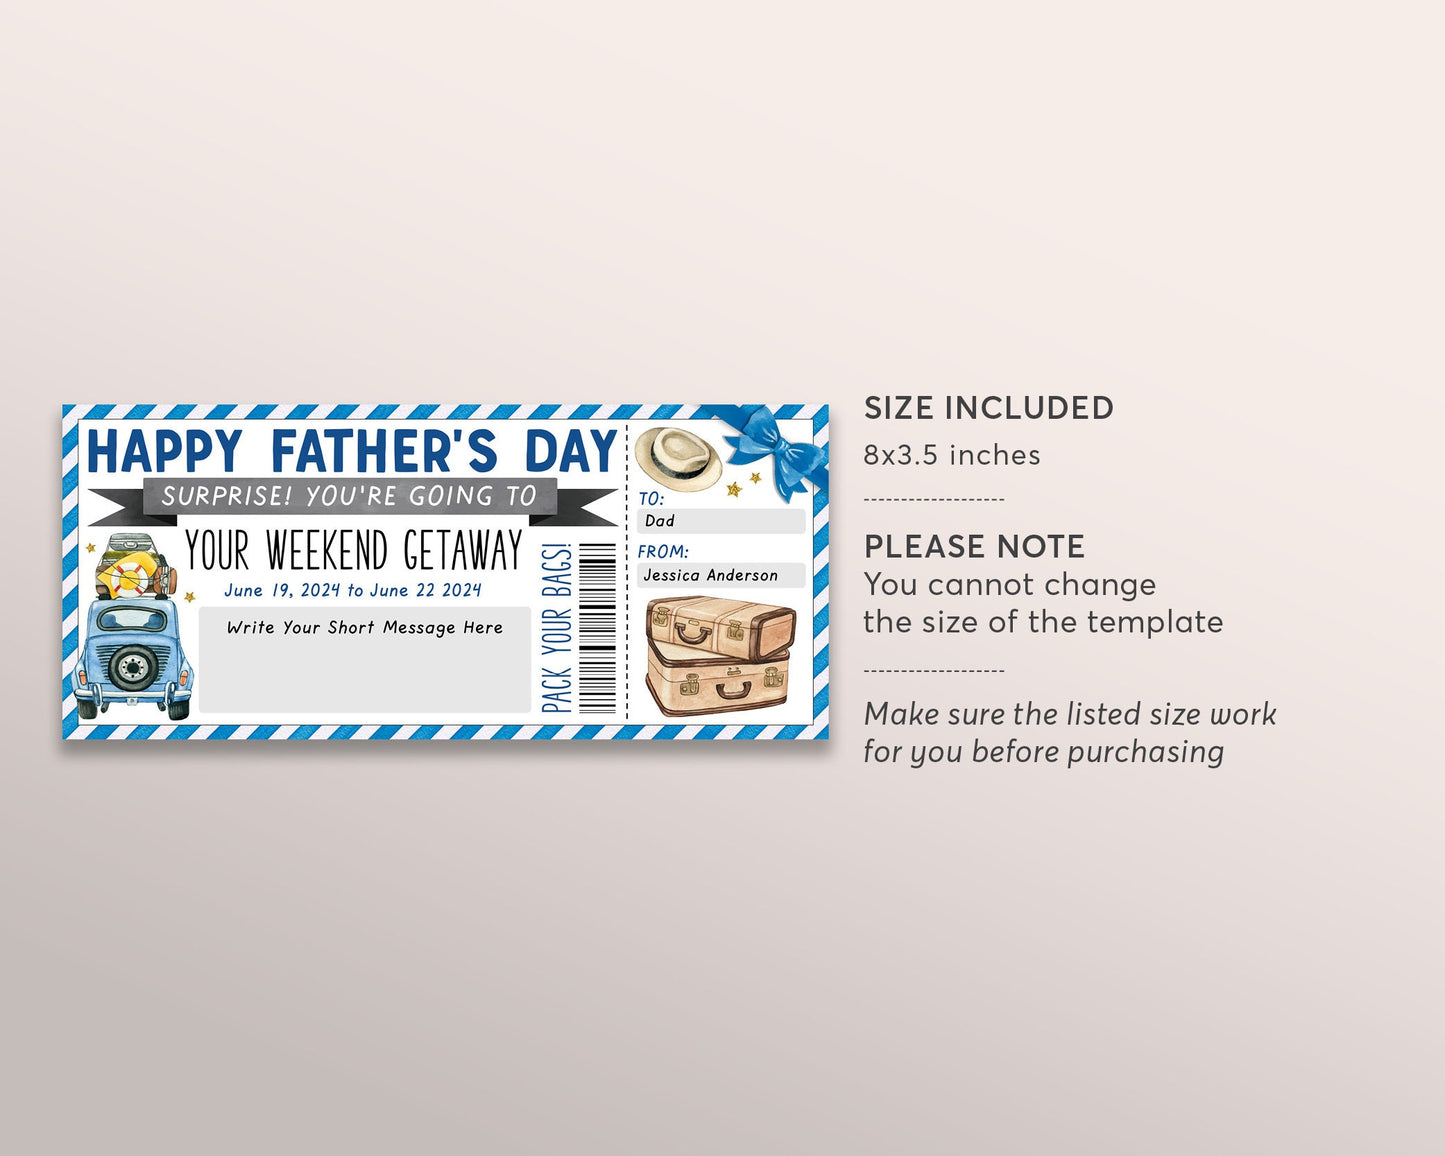 Fathers Day Weekend Getaway Voucher Editable Template, Surprise Vacation Travel Ticket For Dad, Gift Certificate Road Trip Staycation DIY